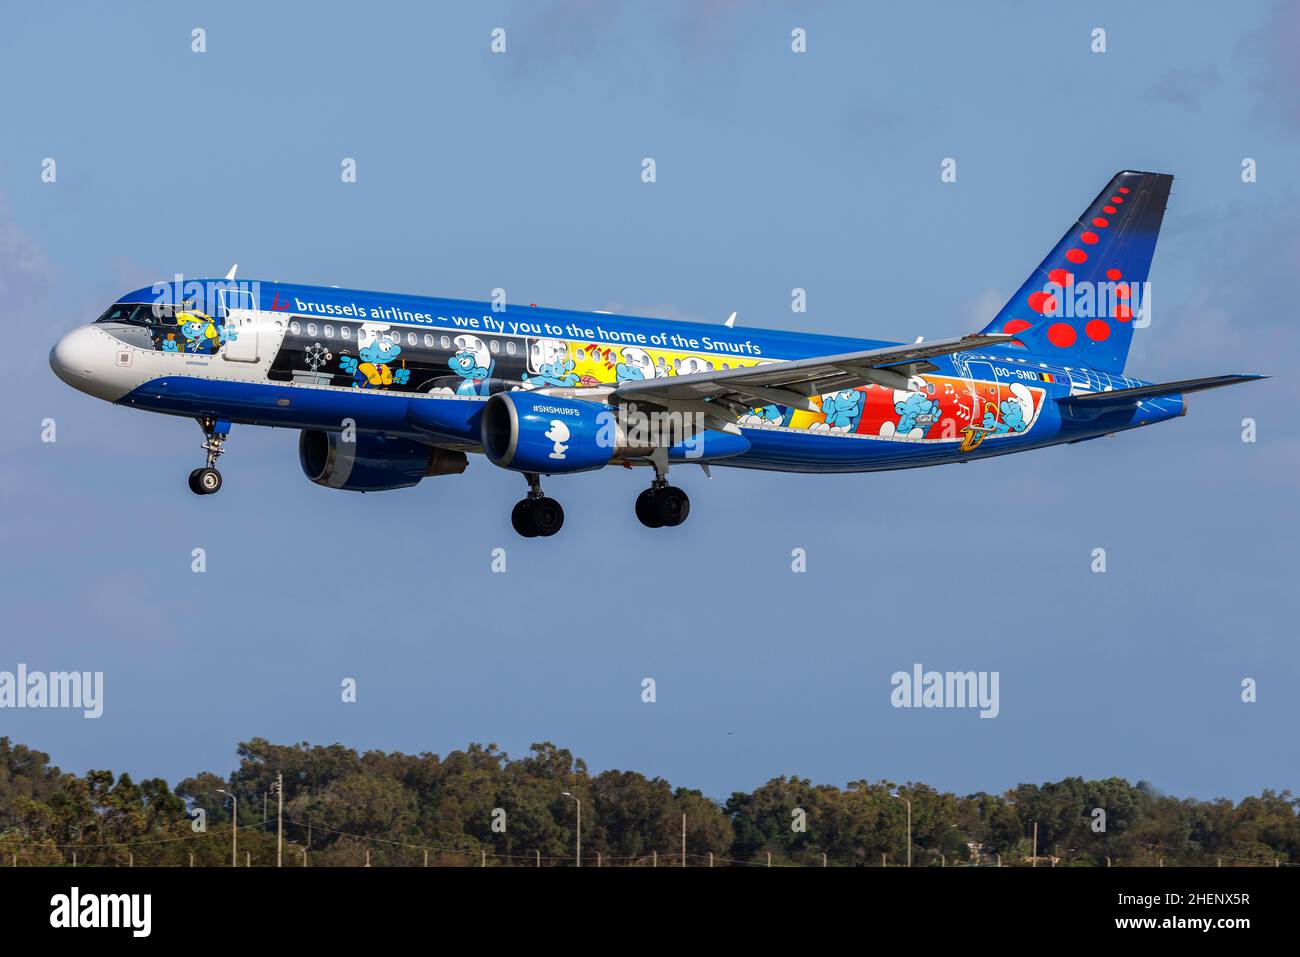 Brussels Airlines Airbus A320-214 (REG: OO-SND) in Brussels Airlines 'The Smurfs' livery. Stock Photo